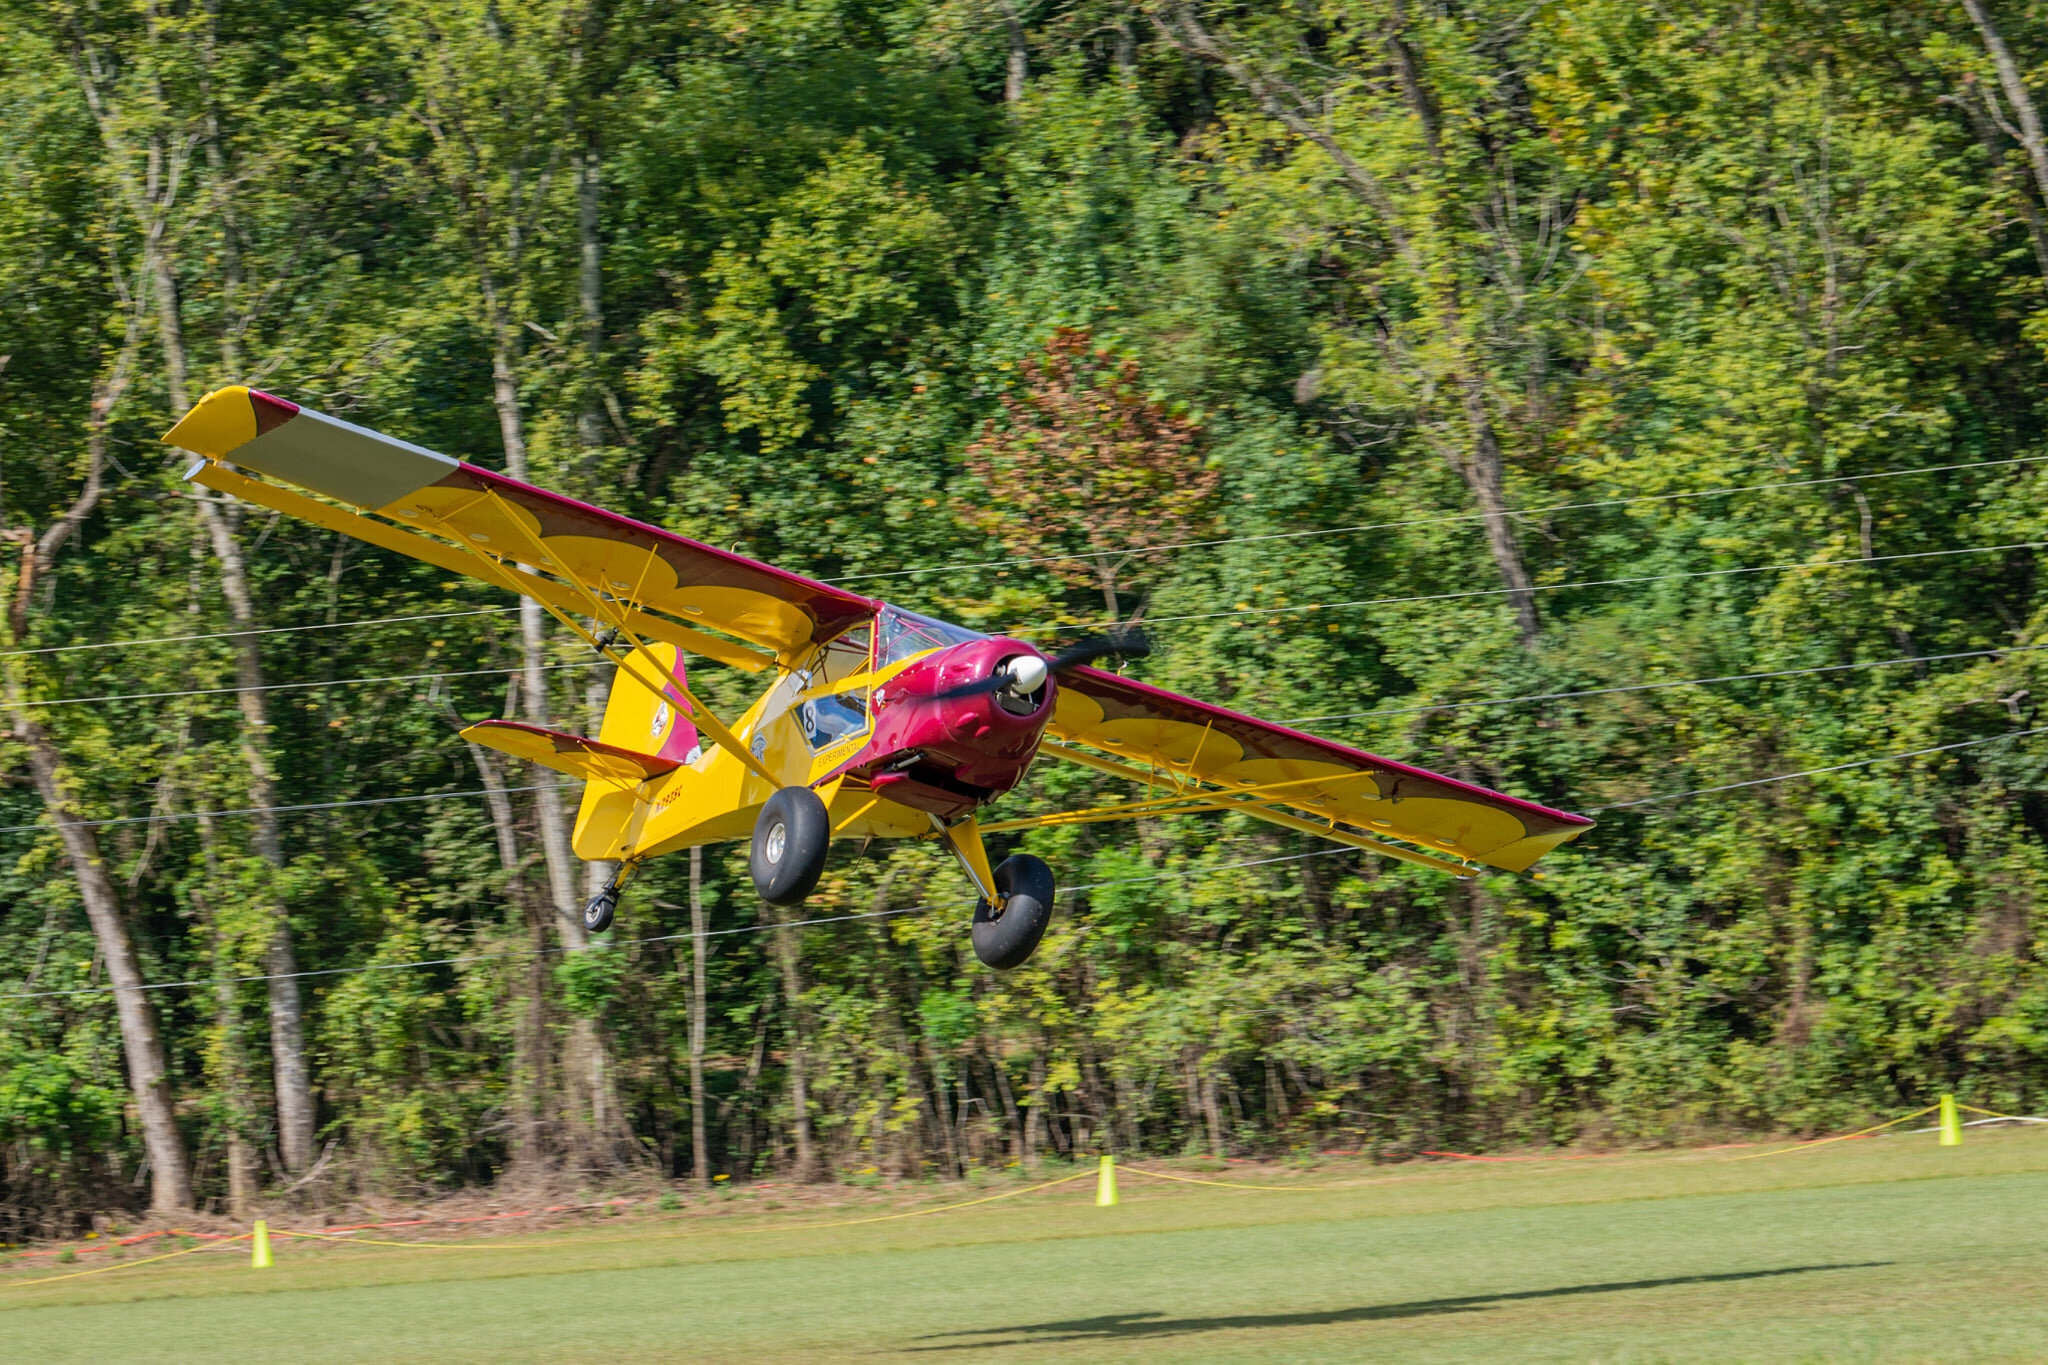 Jared Jestice coming in on final at Arkanstol at @byrdsadventurecenter in his Kitfox IV. 

What is Arkanstol? A timed STOL competition across three runways at Byrd's Adventure Center here in the Ozark Mountains of Arkansas. We have simulated obstacle